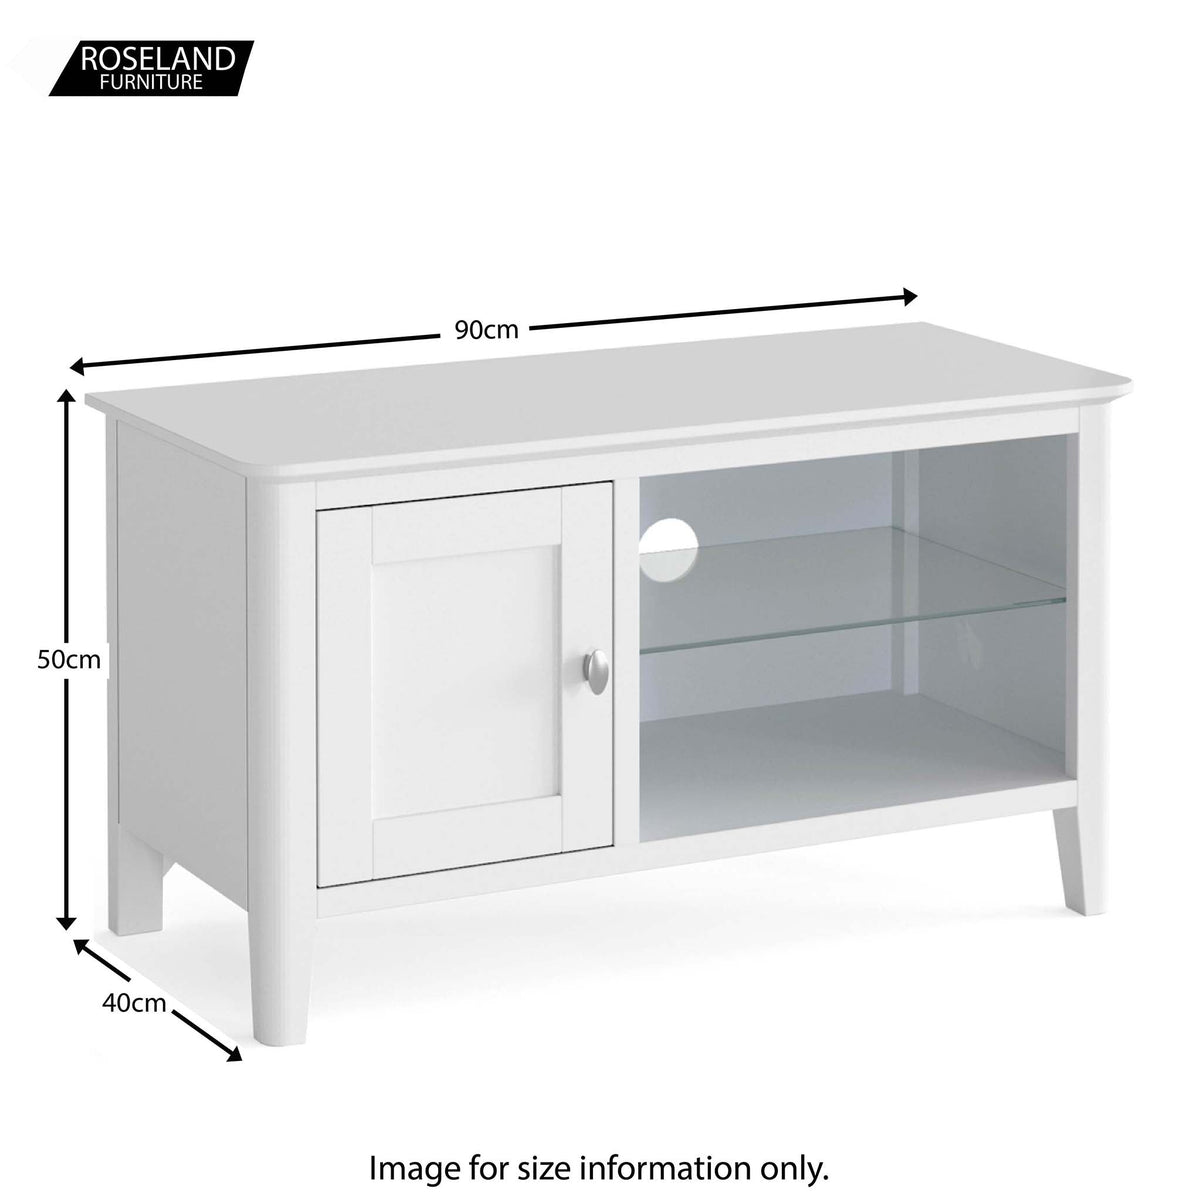 Chester White 90cm TV Stand - Size Guide